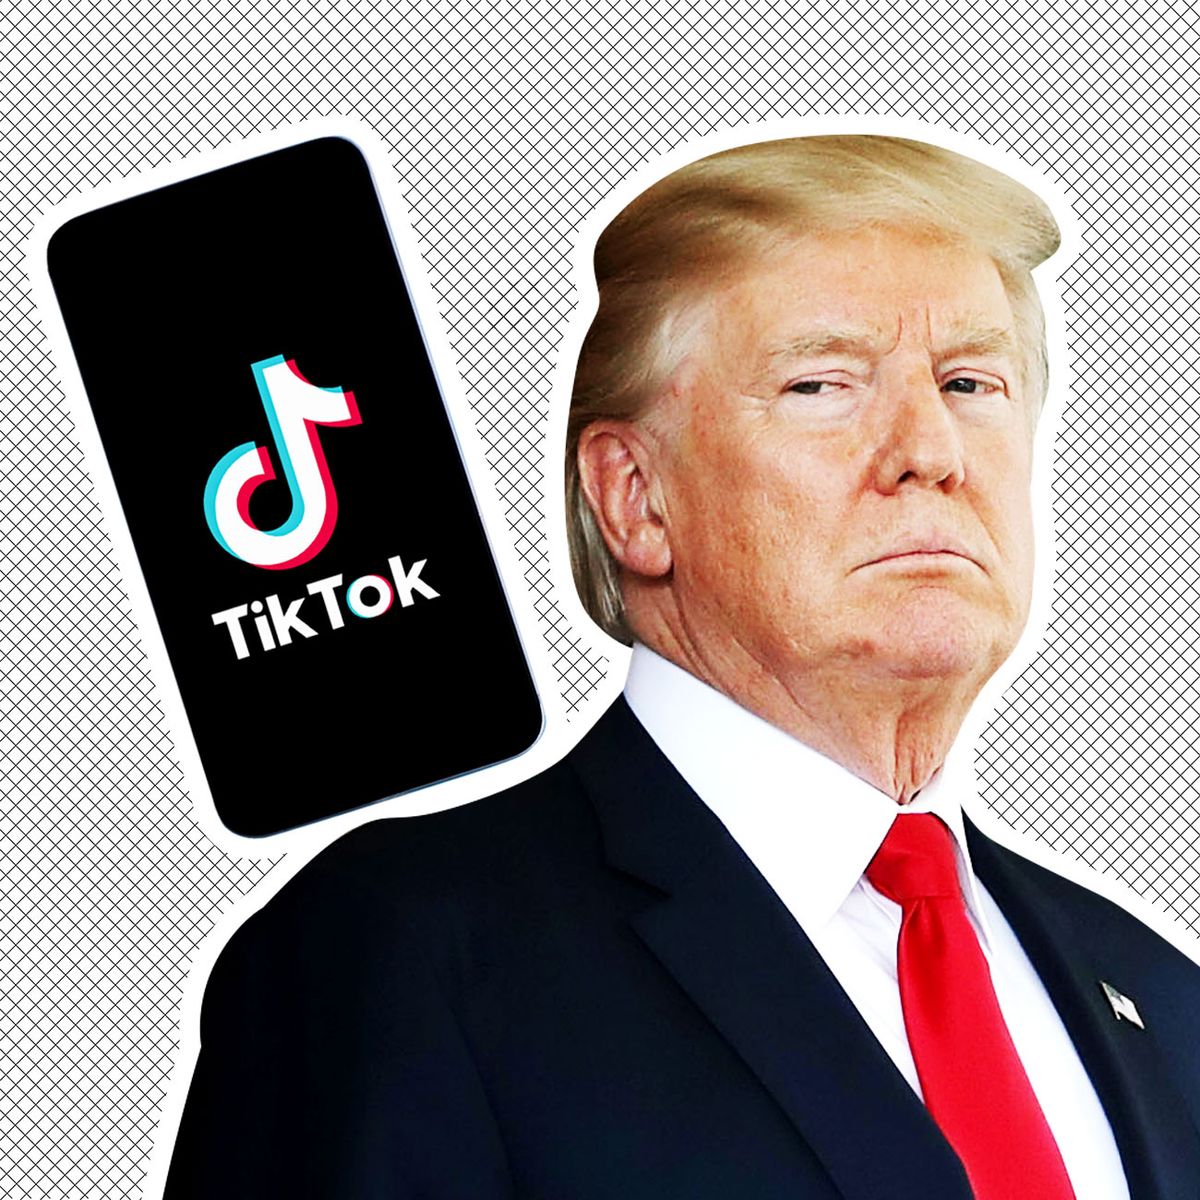 Why The Trump Administration Wants to Ban TikTok